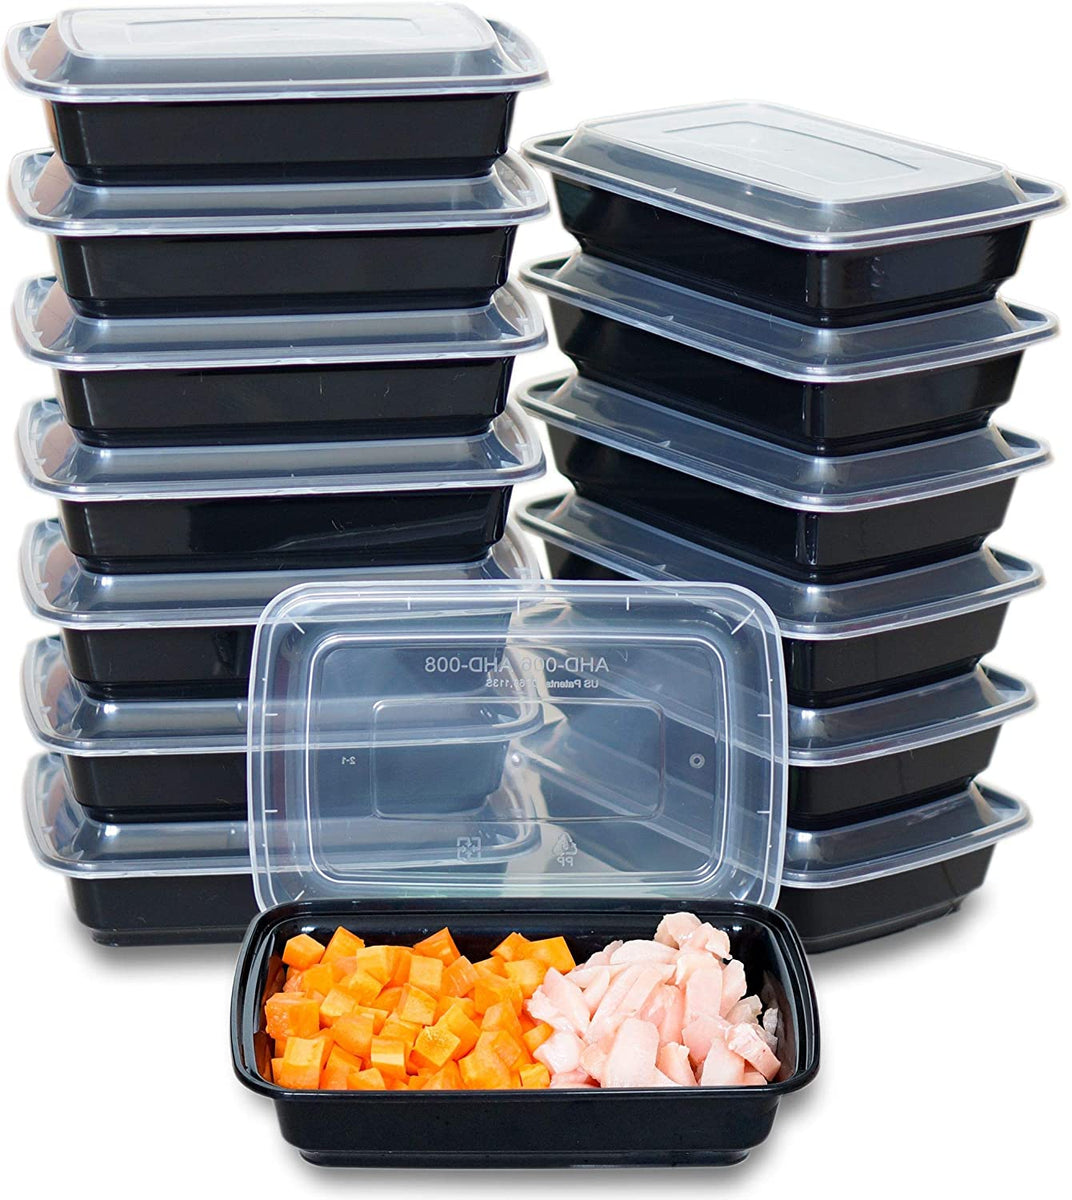 CTC-8399] Round Meal Prep Bowl Container with Lids - 32oz (50/100/150 – CTC  Packaging